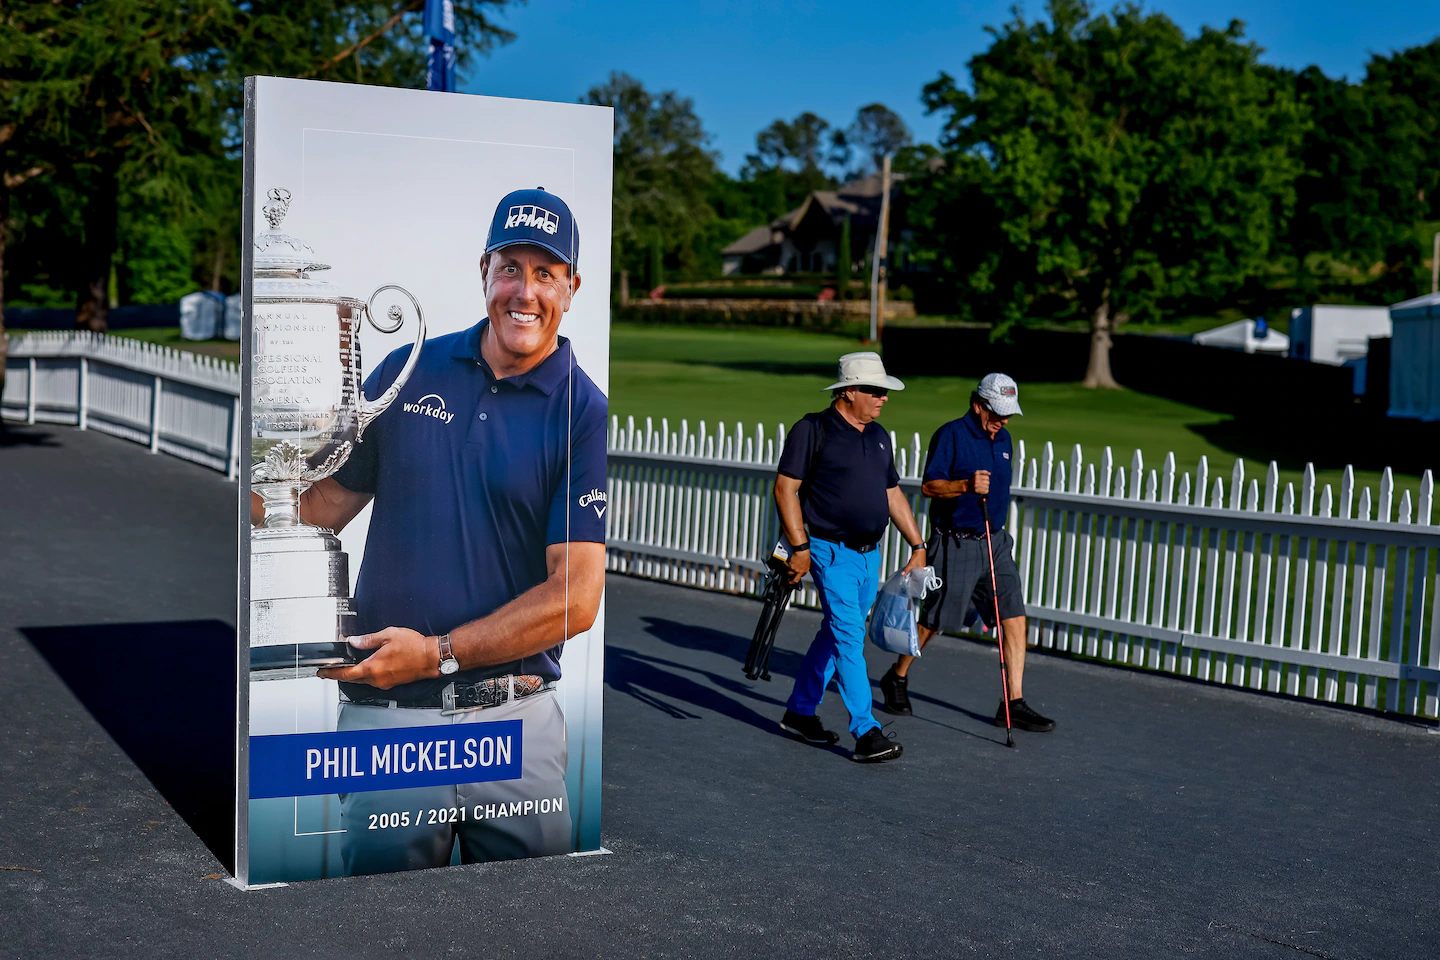 At the PGA Championship, Phil Mickelson's absence is an 'elephant in the room'

